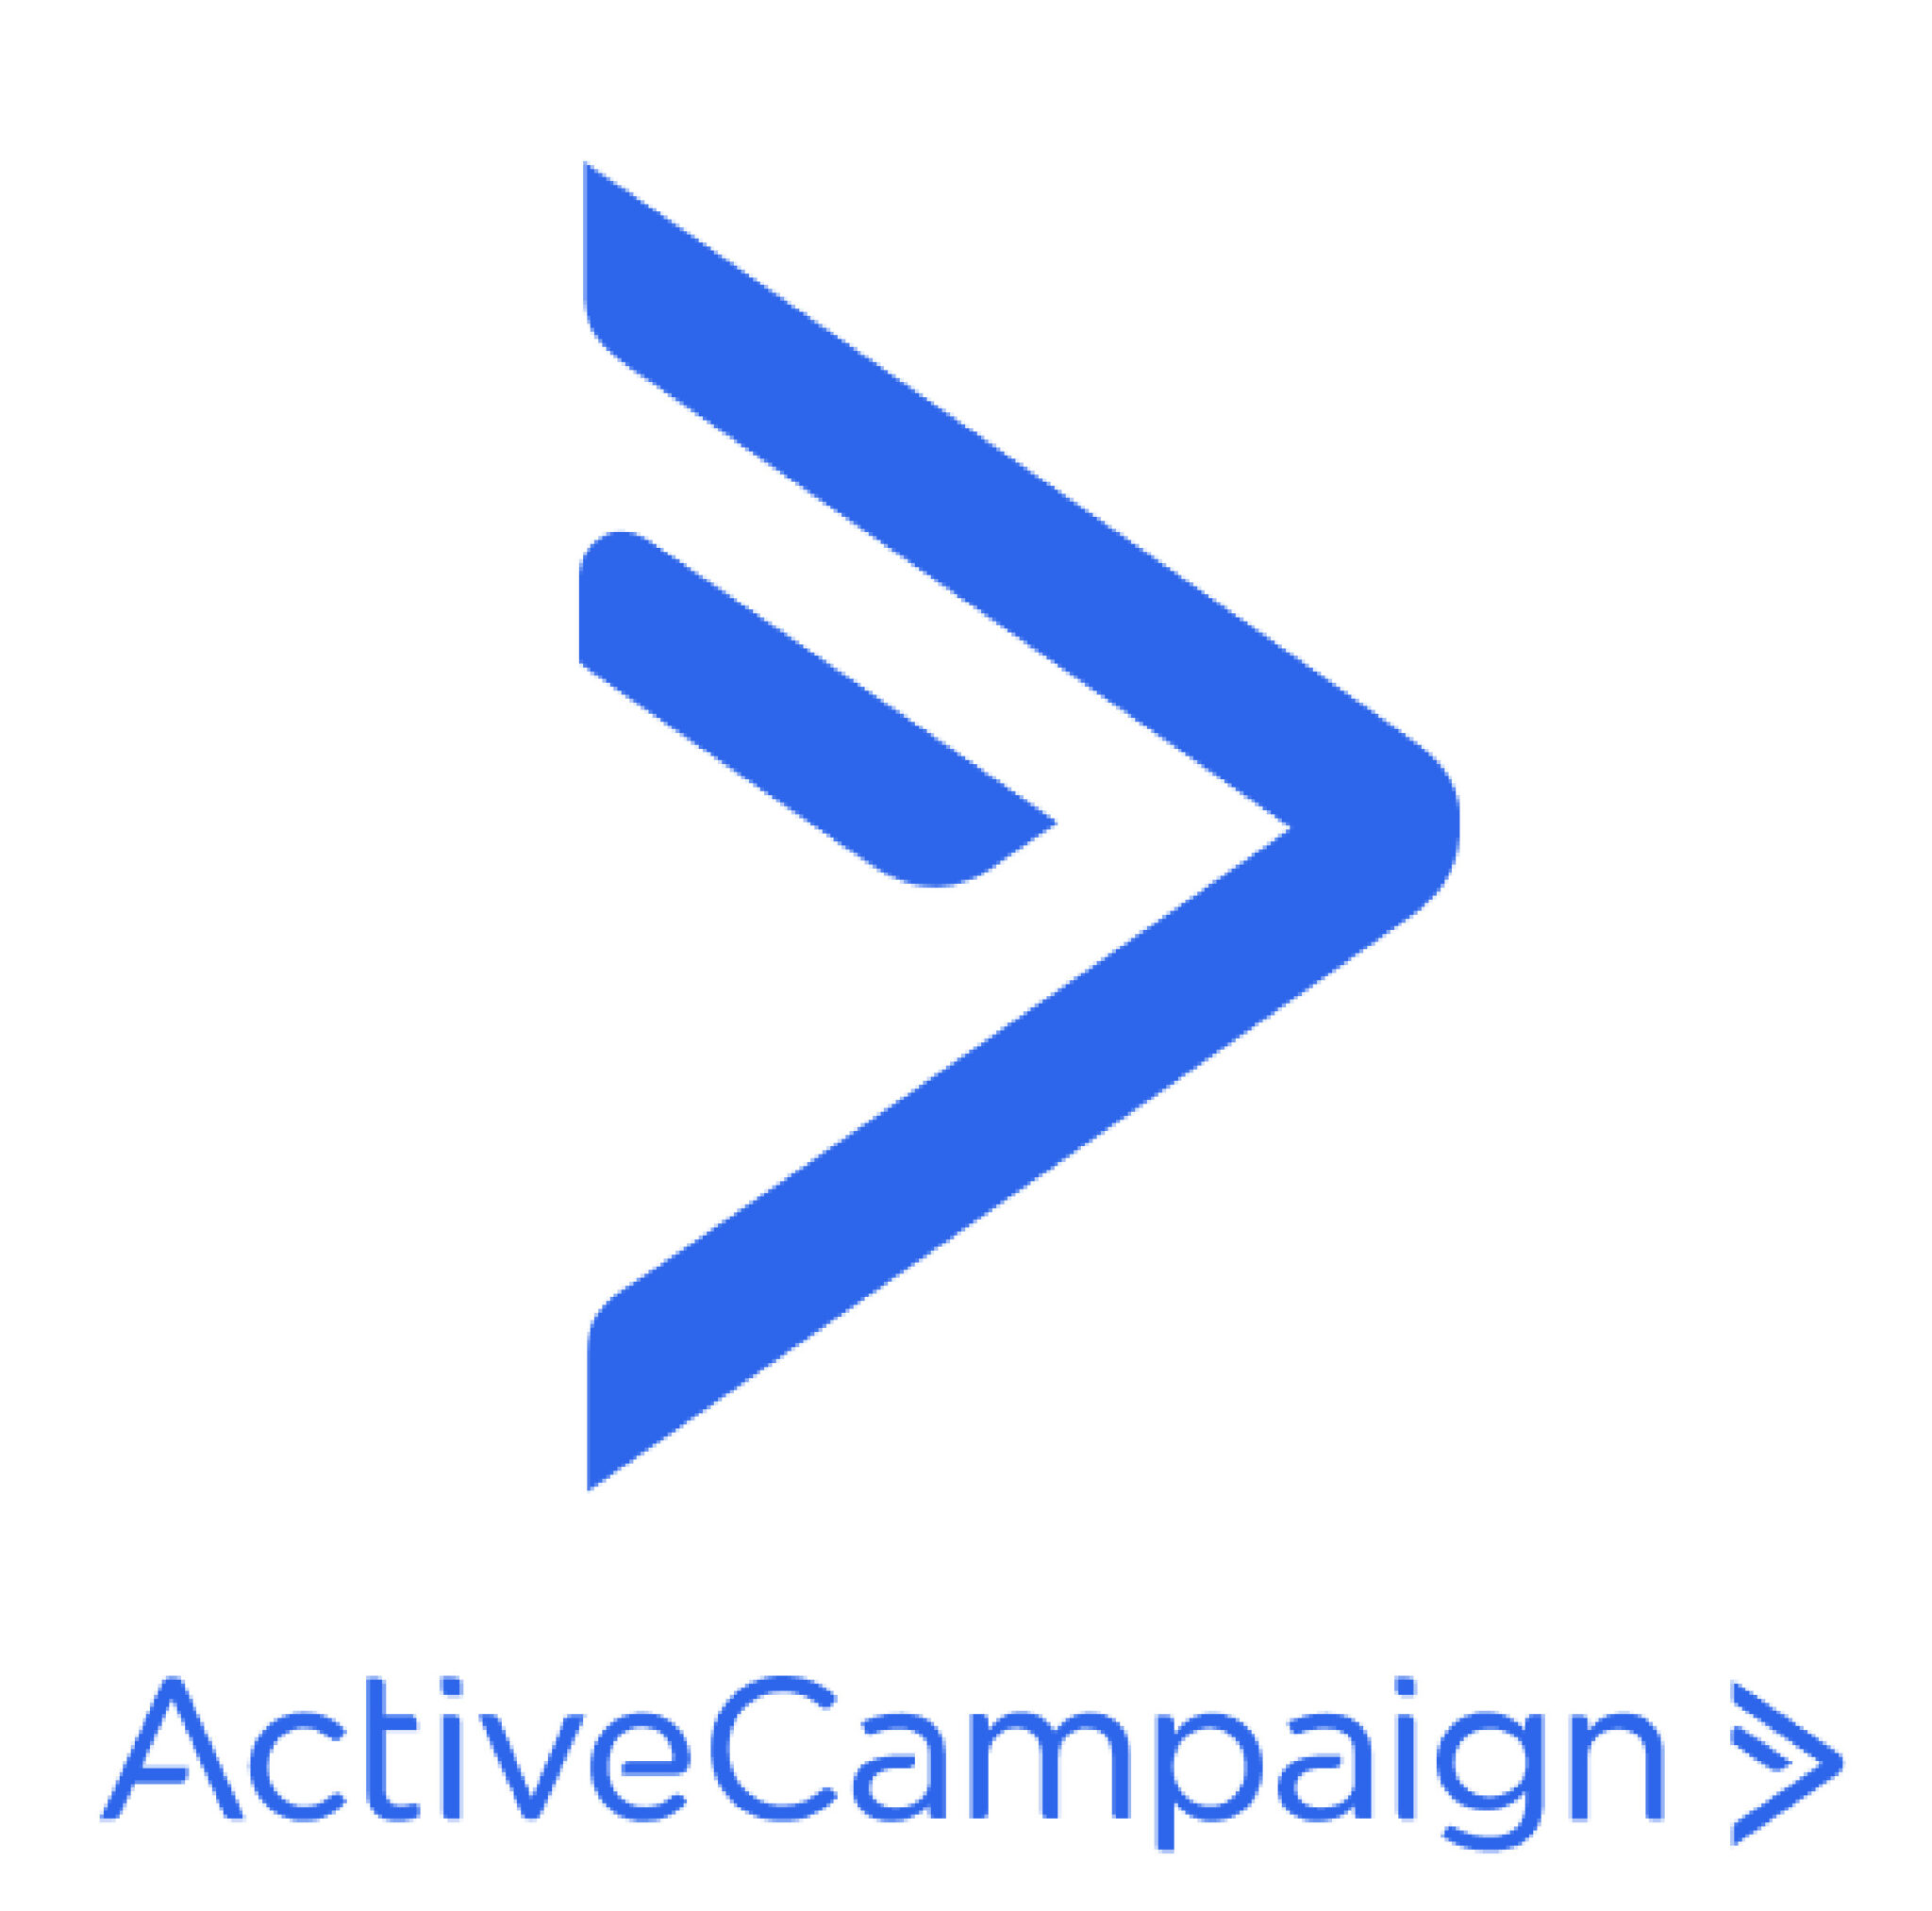 Active Campaign Email Marketing